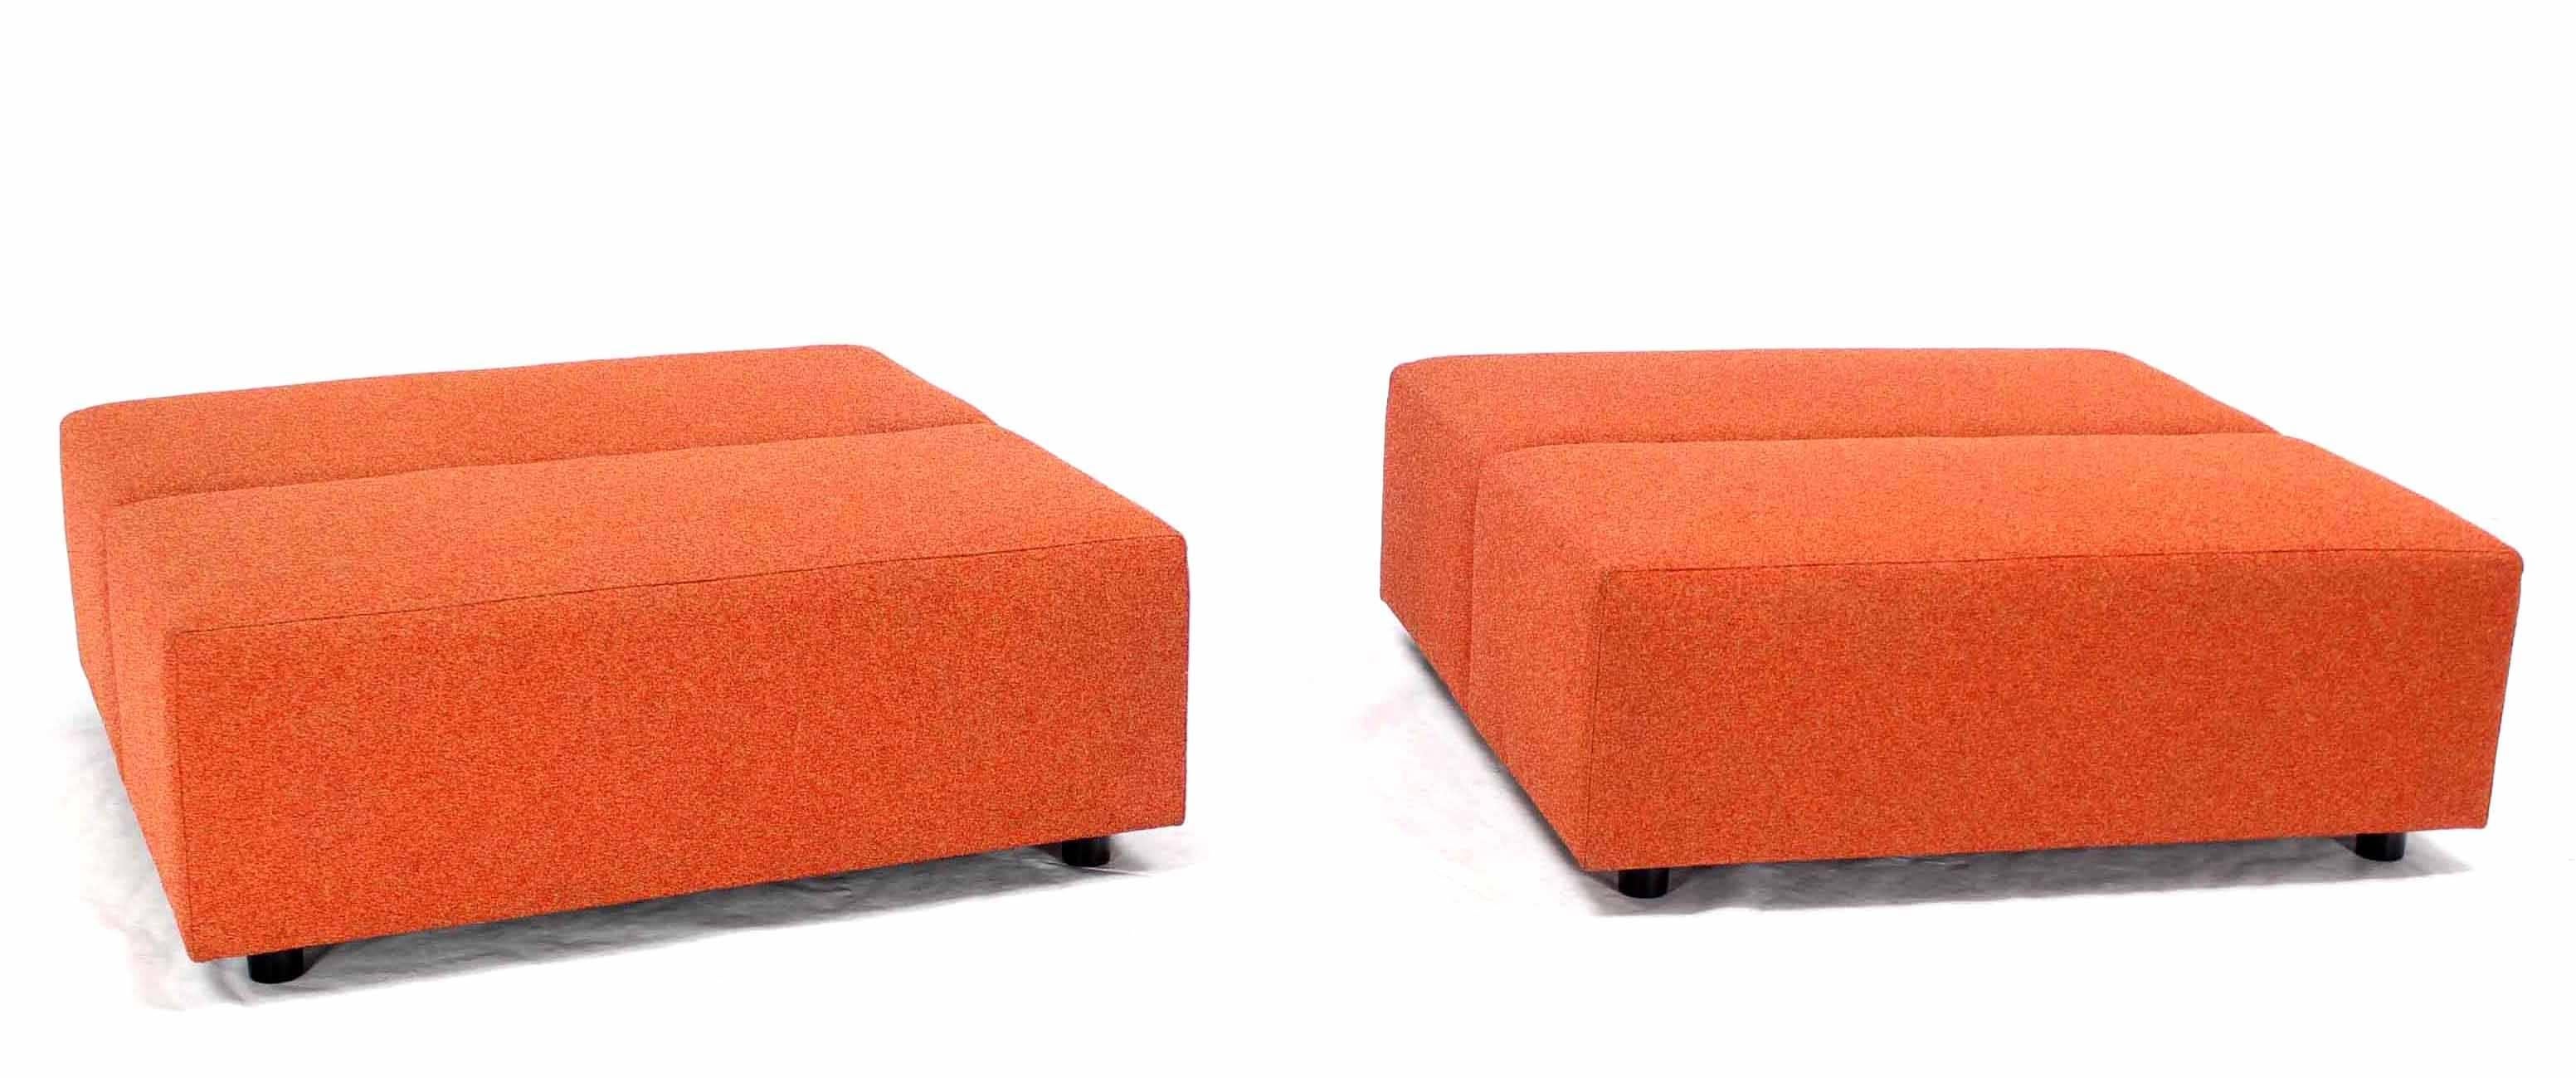 Pair of Large Oversize 4x4 Orange Upholstery Square Benches by Steelcase Sofa In Excellent Condition For Sale In Rockaway, NJ